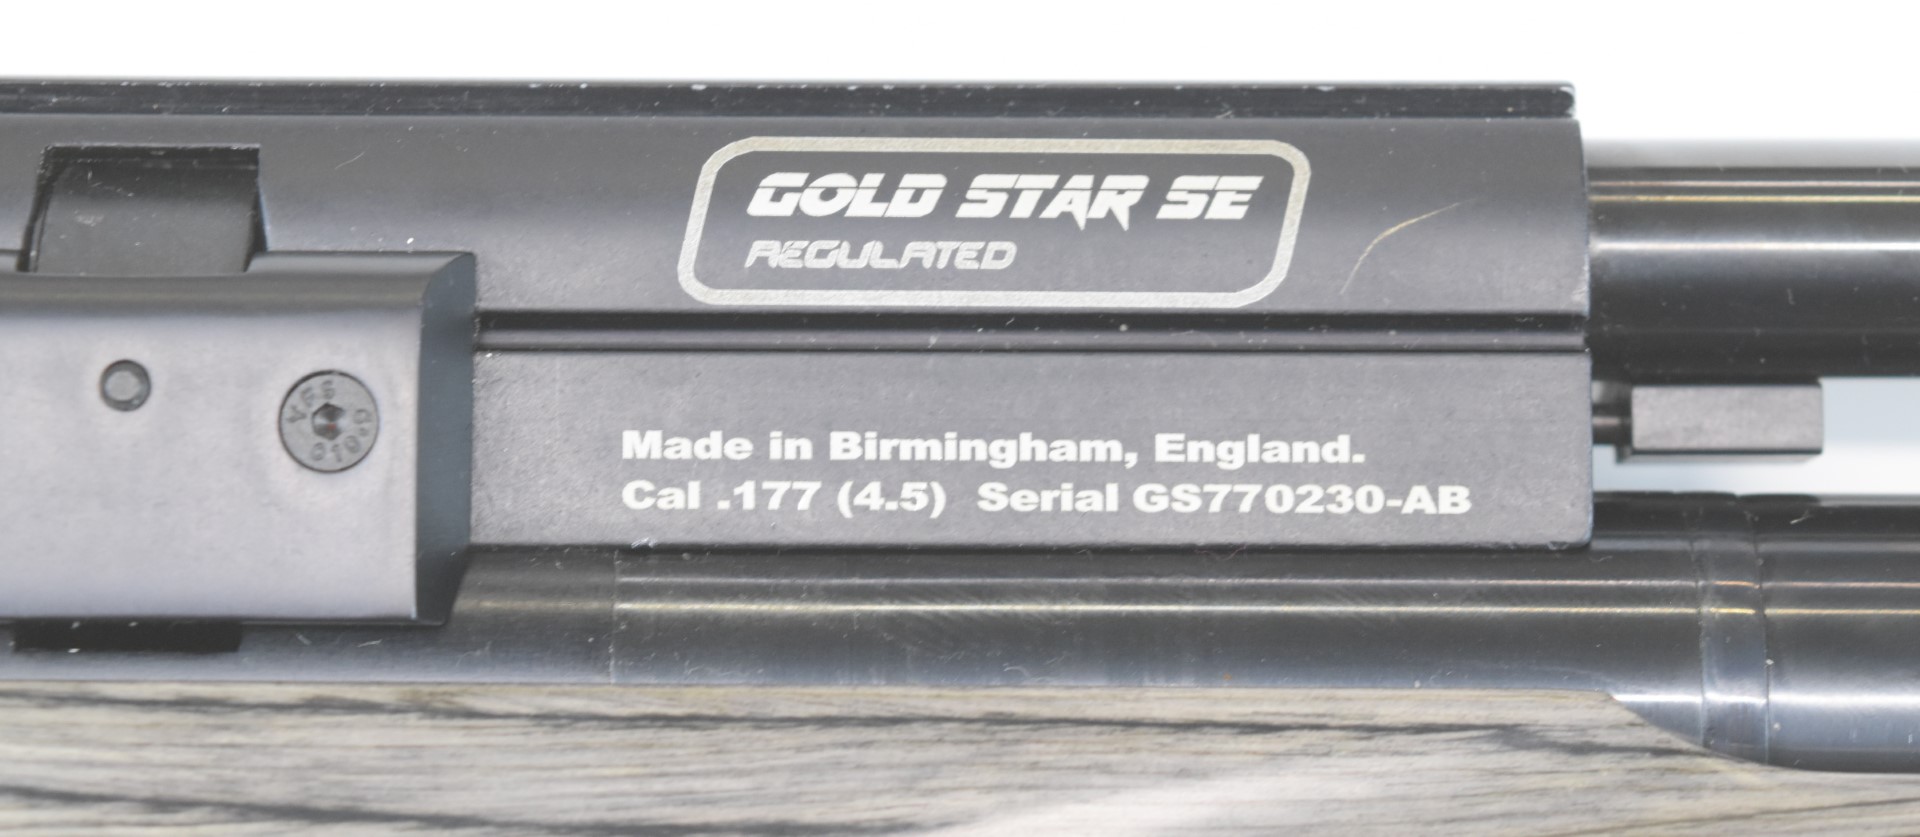 BSA Gold Star SE Regulated .177 PCP air rifle with show wood stock, semi-pistol grip, adjustable - Image 10 of 20